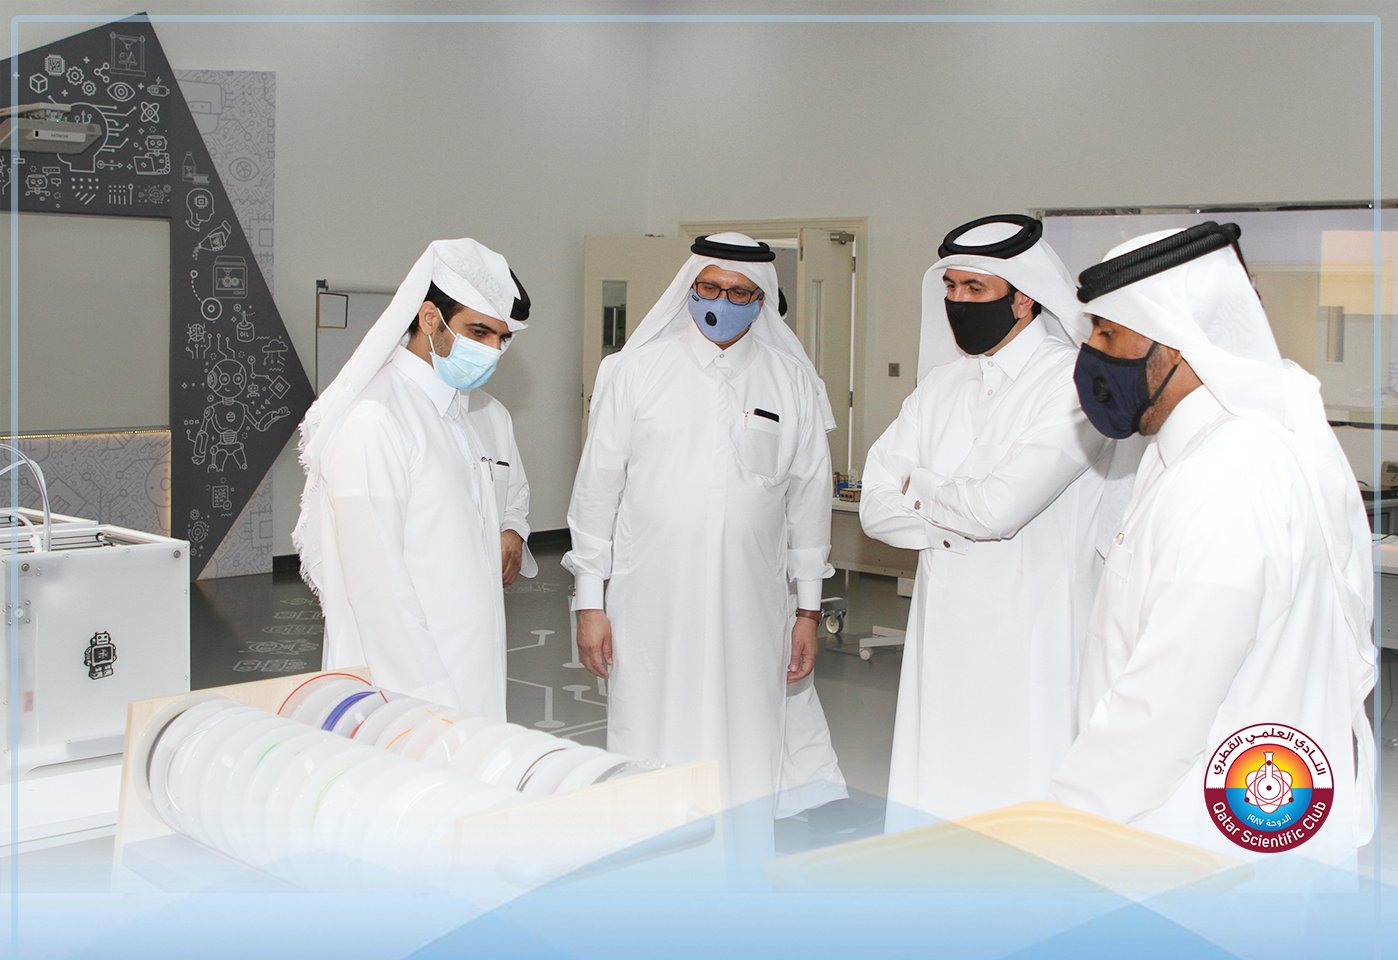 Qatar Scientific Club Manufactures 6 Thousand Face Shields for HMC and Oryx Staff